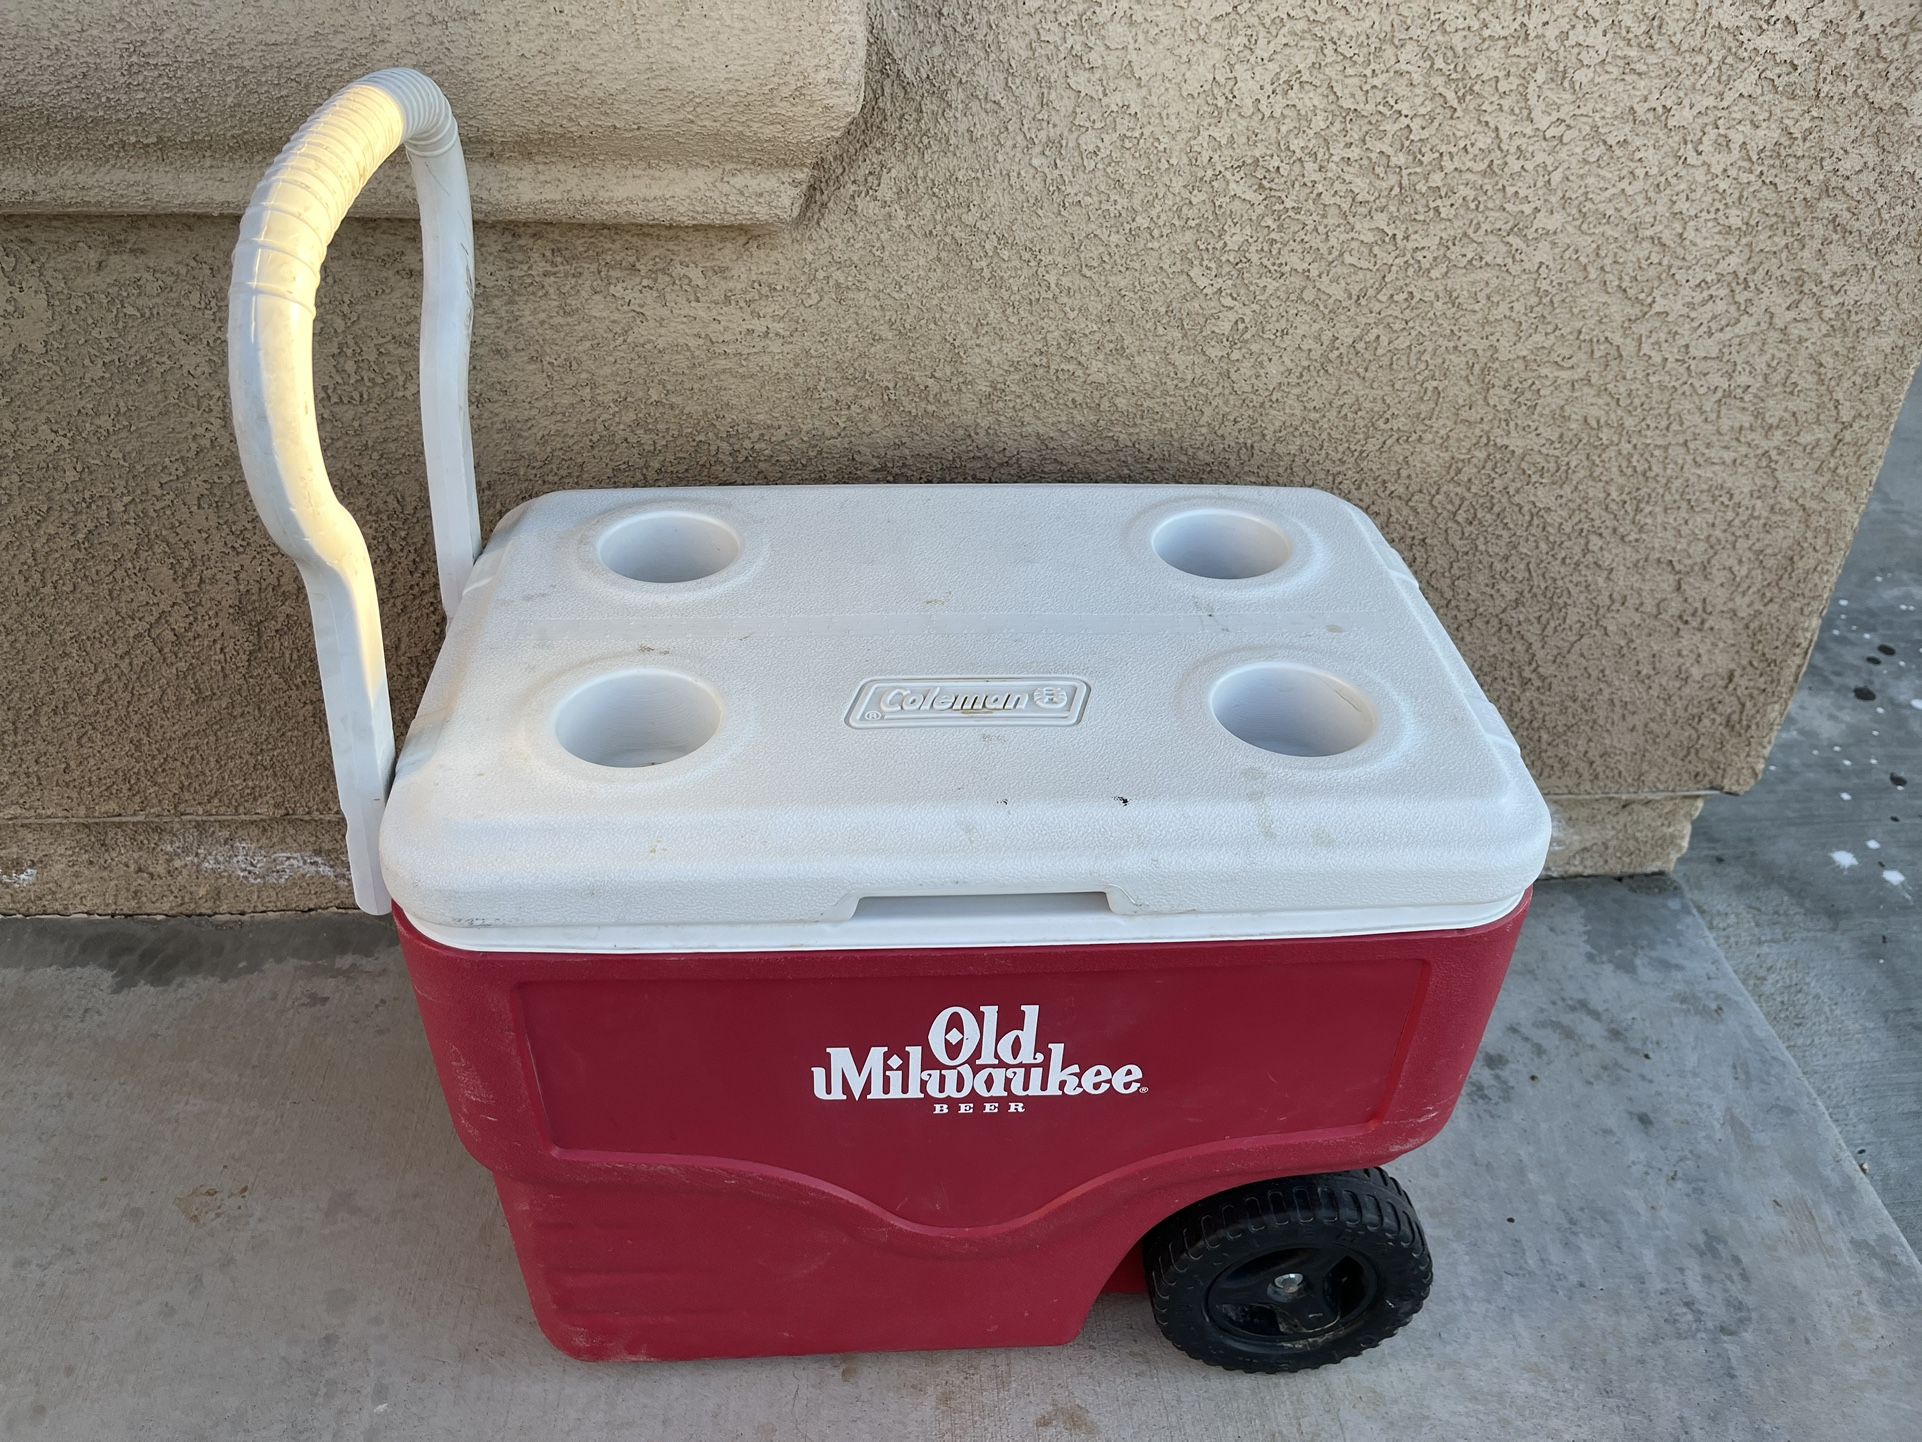 Vintage Collector Coleman Igloo Cooler Ice Chest